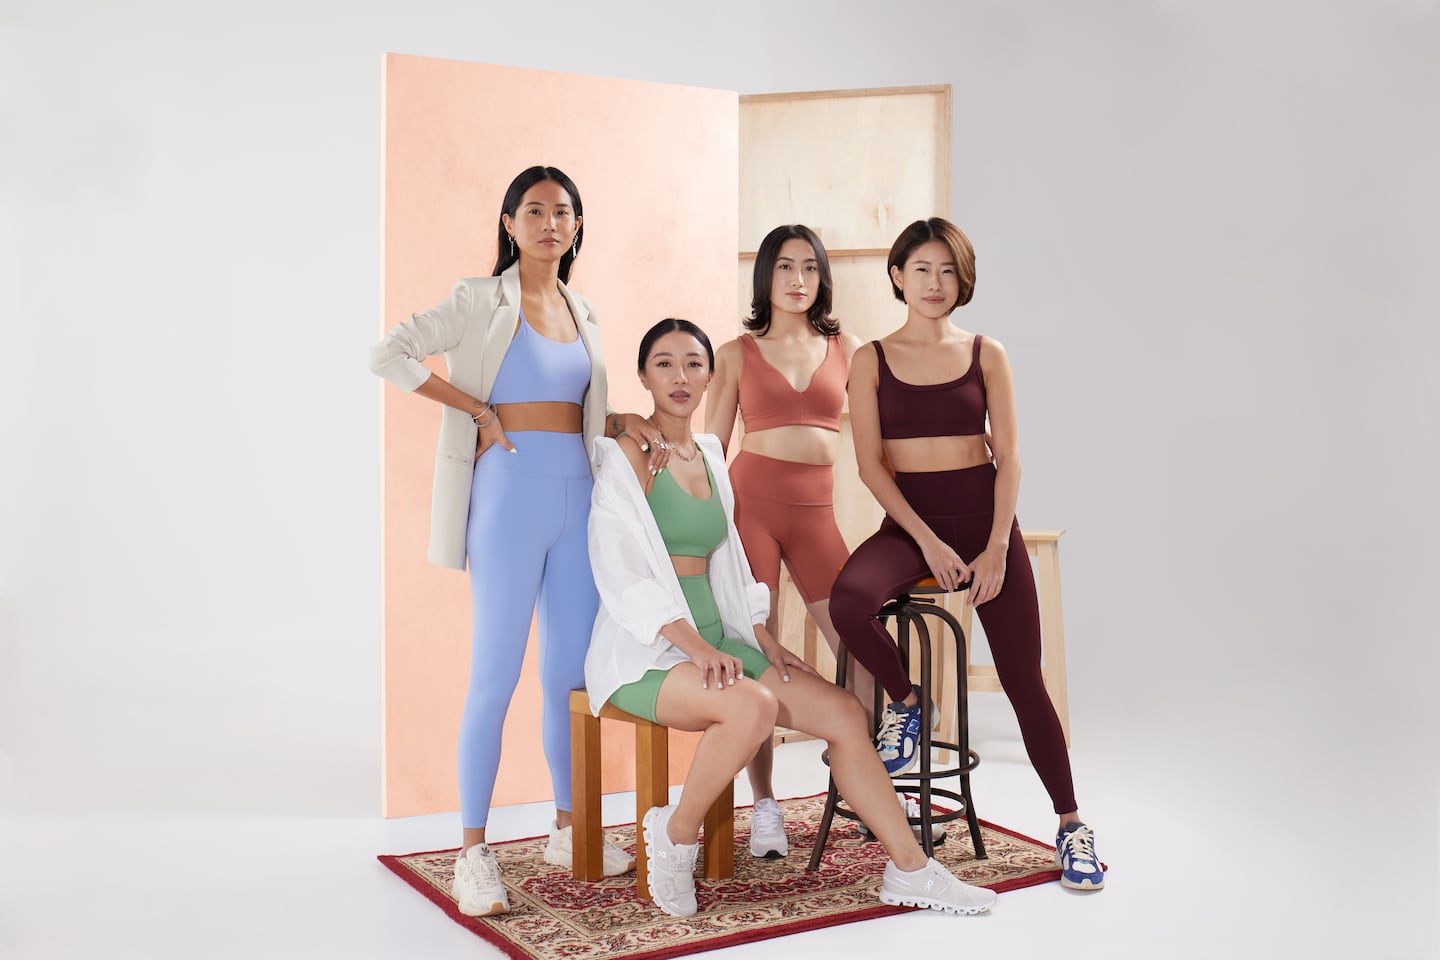 Left to Right: Love Bonito CEO Dione Song, Love Bonito Co-founder Rachel Lim, Co-founders of Cheak (formerly Butter) Olivia Yiong and Tiffany Chng.